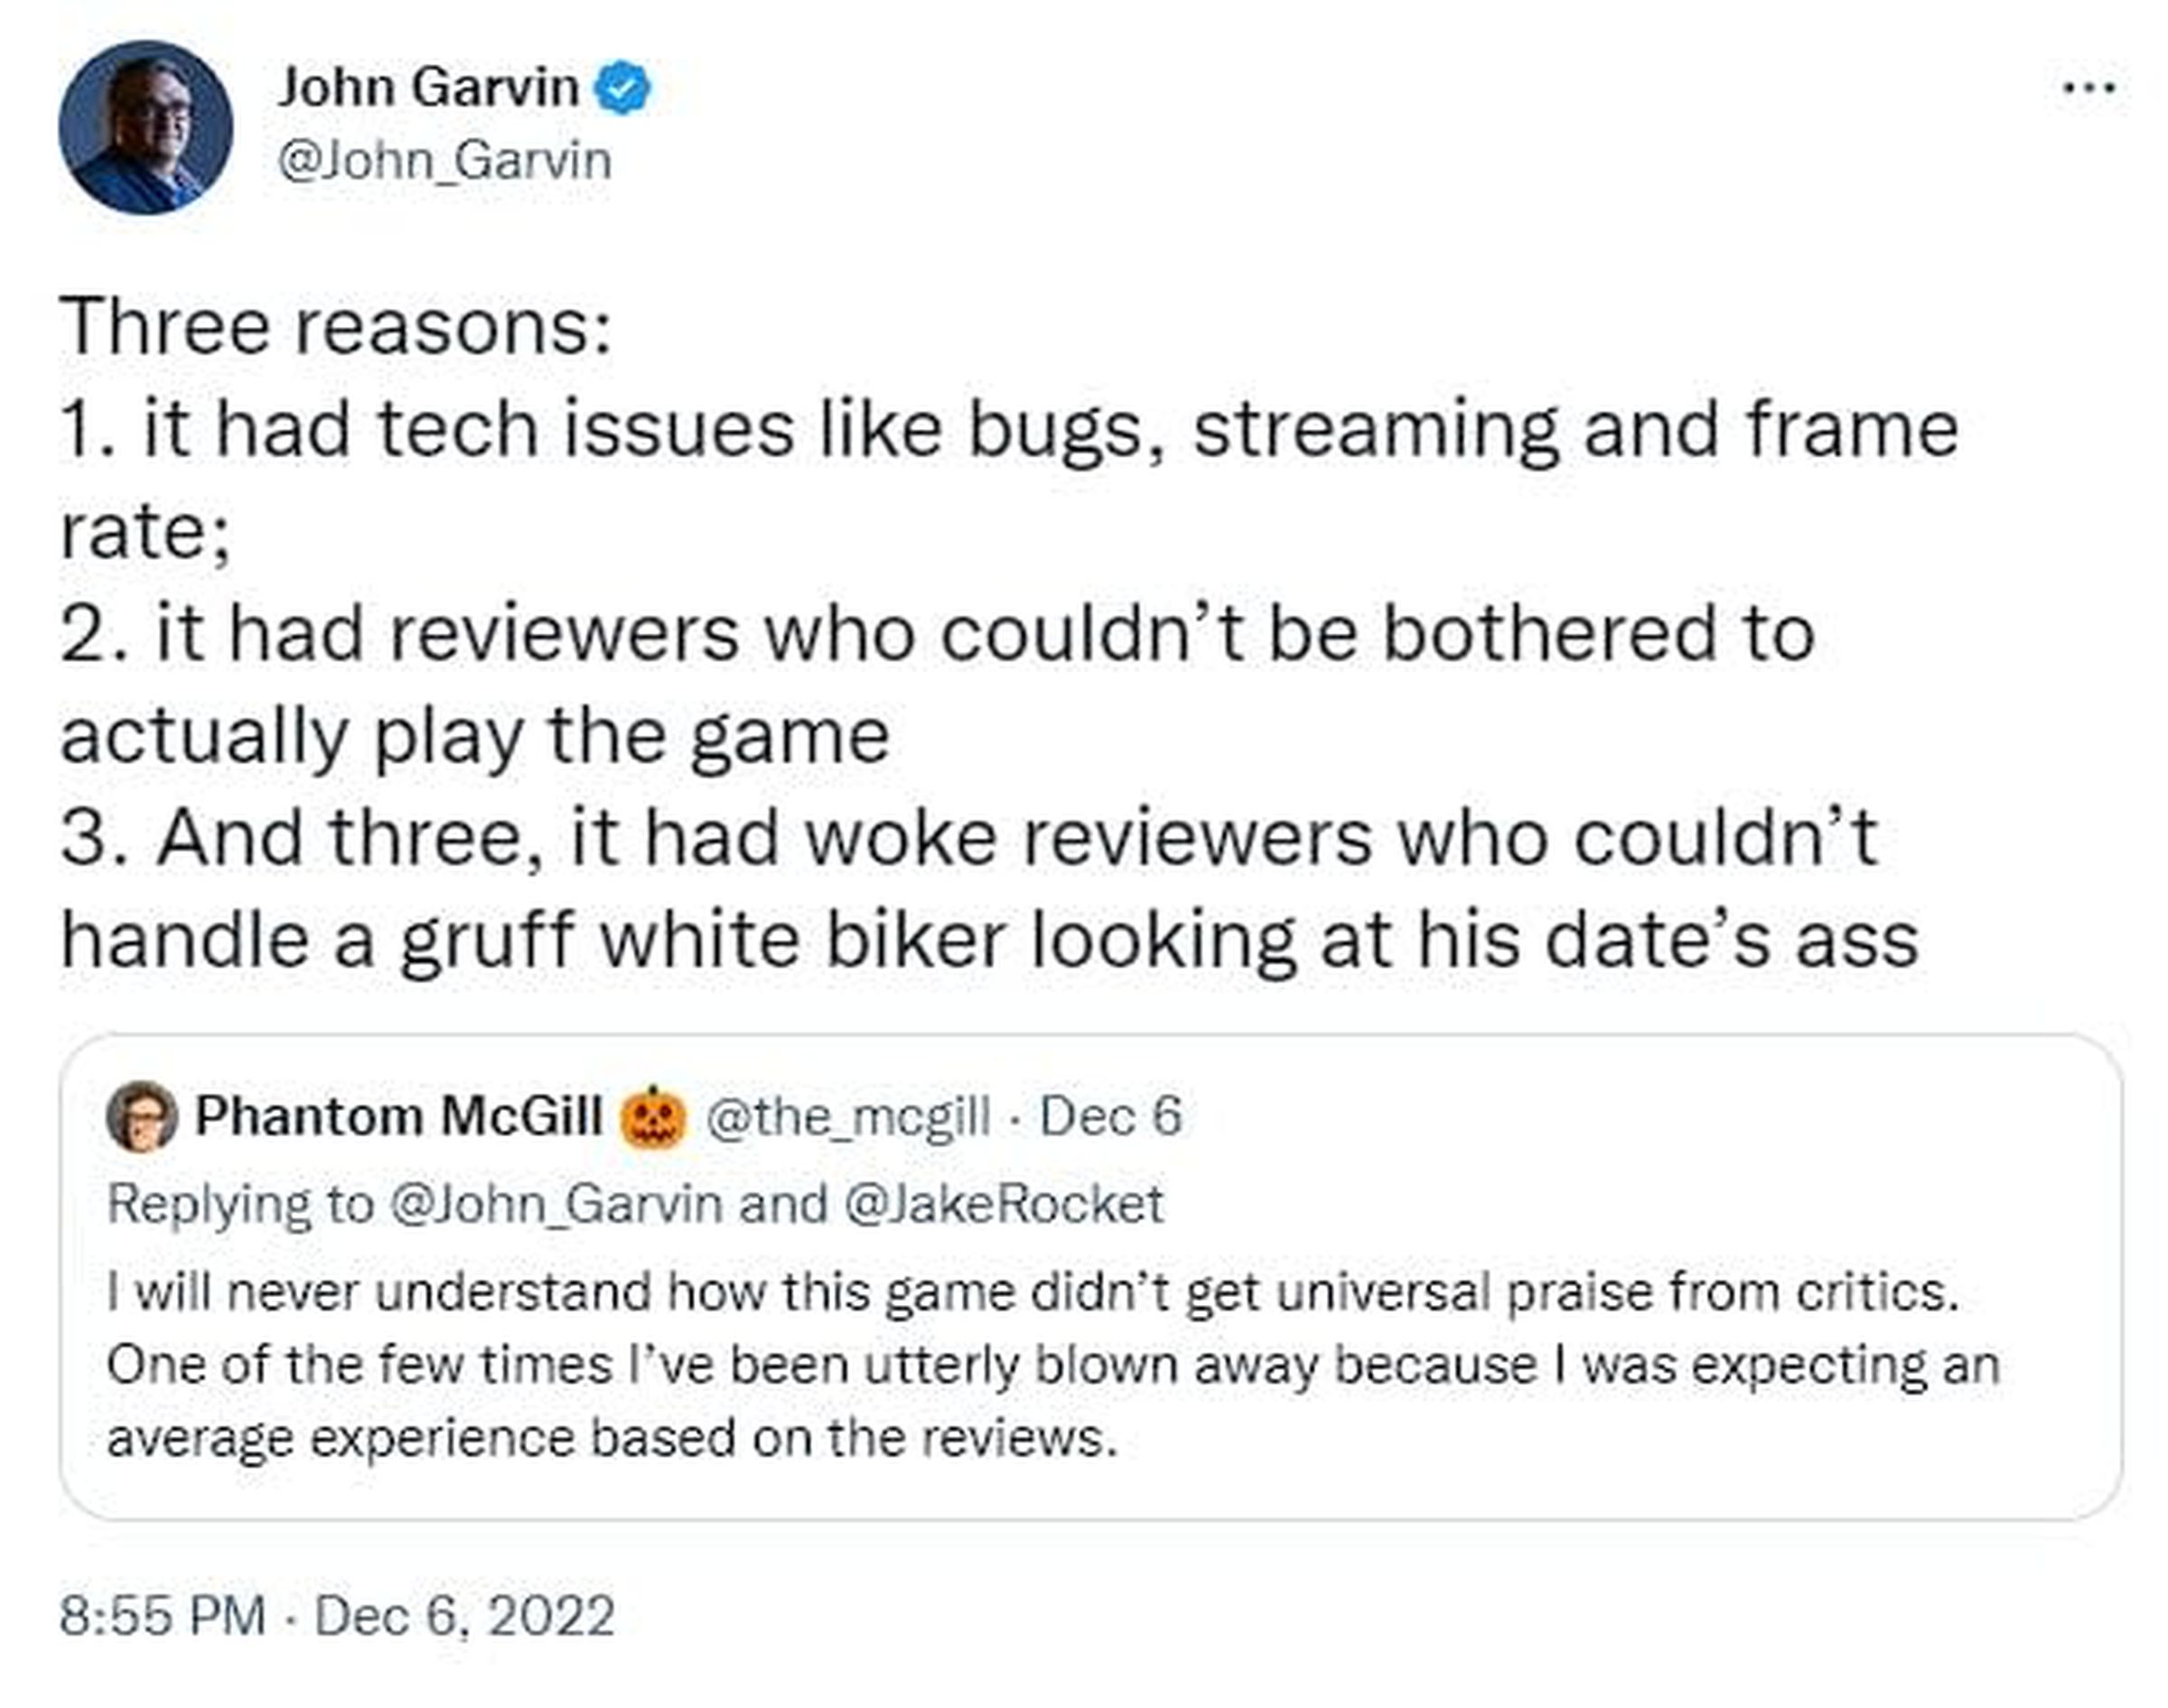 Screenshot from Twitter of a now deleted tweet from Days Gone game director John Garvin commenting on why his game wasn’t more positively reviewed saying: “Three reasons: 1. it had tech issues like bugs, streaming and frame rate;2. it had reviewers who couldn’t be bothered to actually play the game 3. And three, it had woke reviewers who couldn’t handle a gruff white biker looking at his date’s ass.”